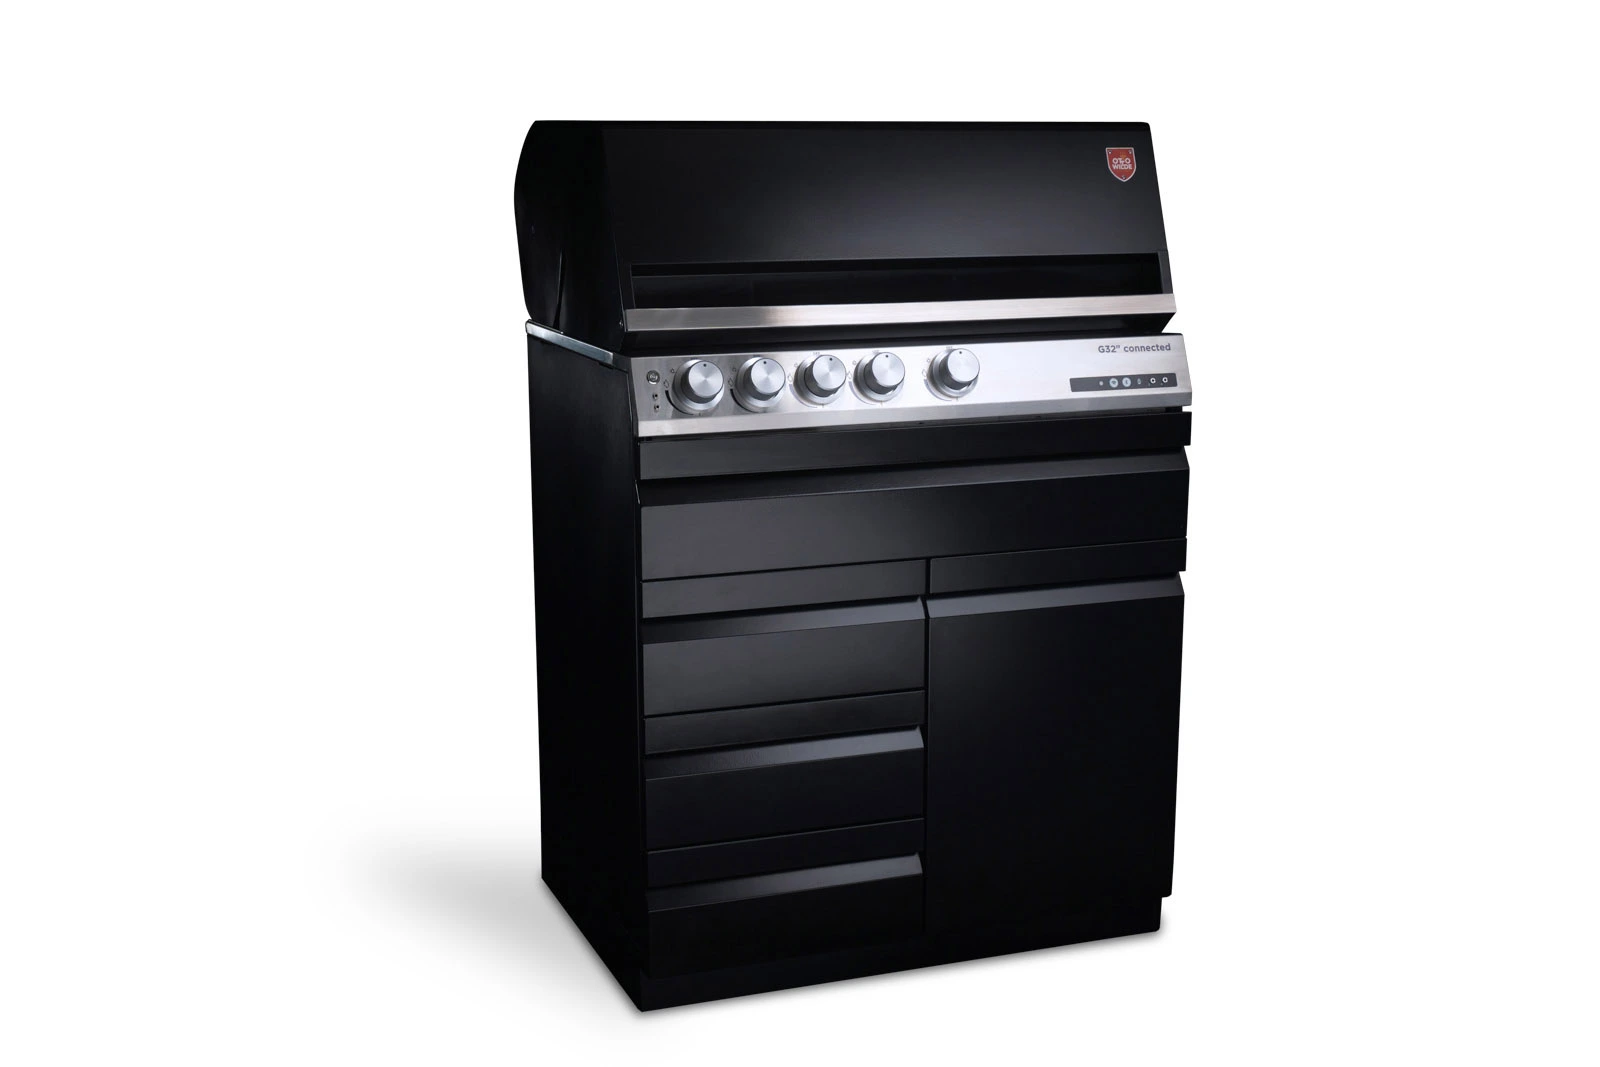 Otto Wilde G32 Connected Gasgrill